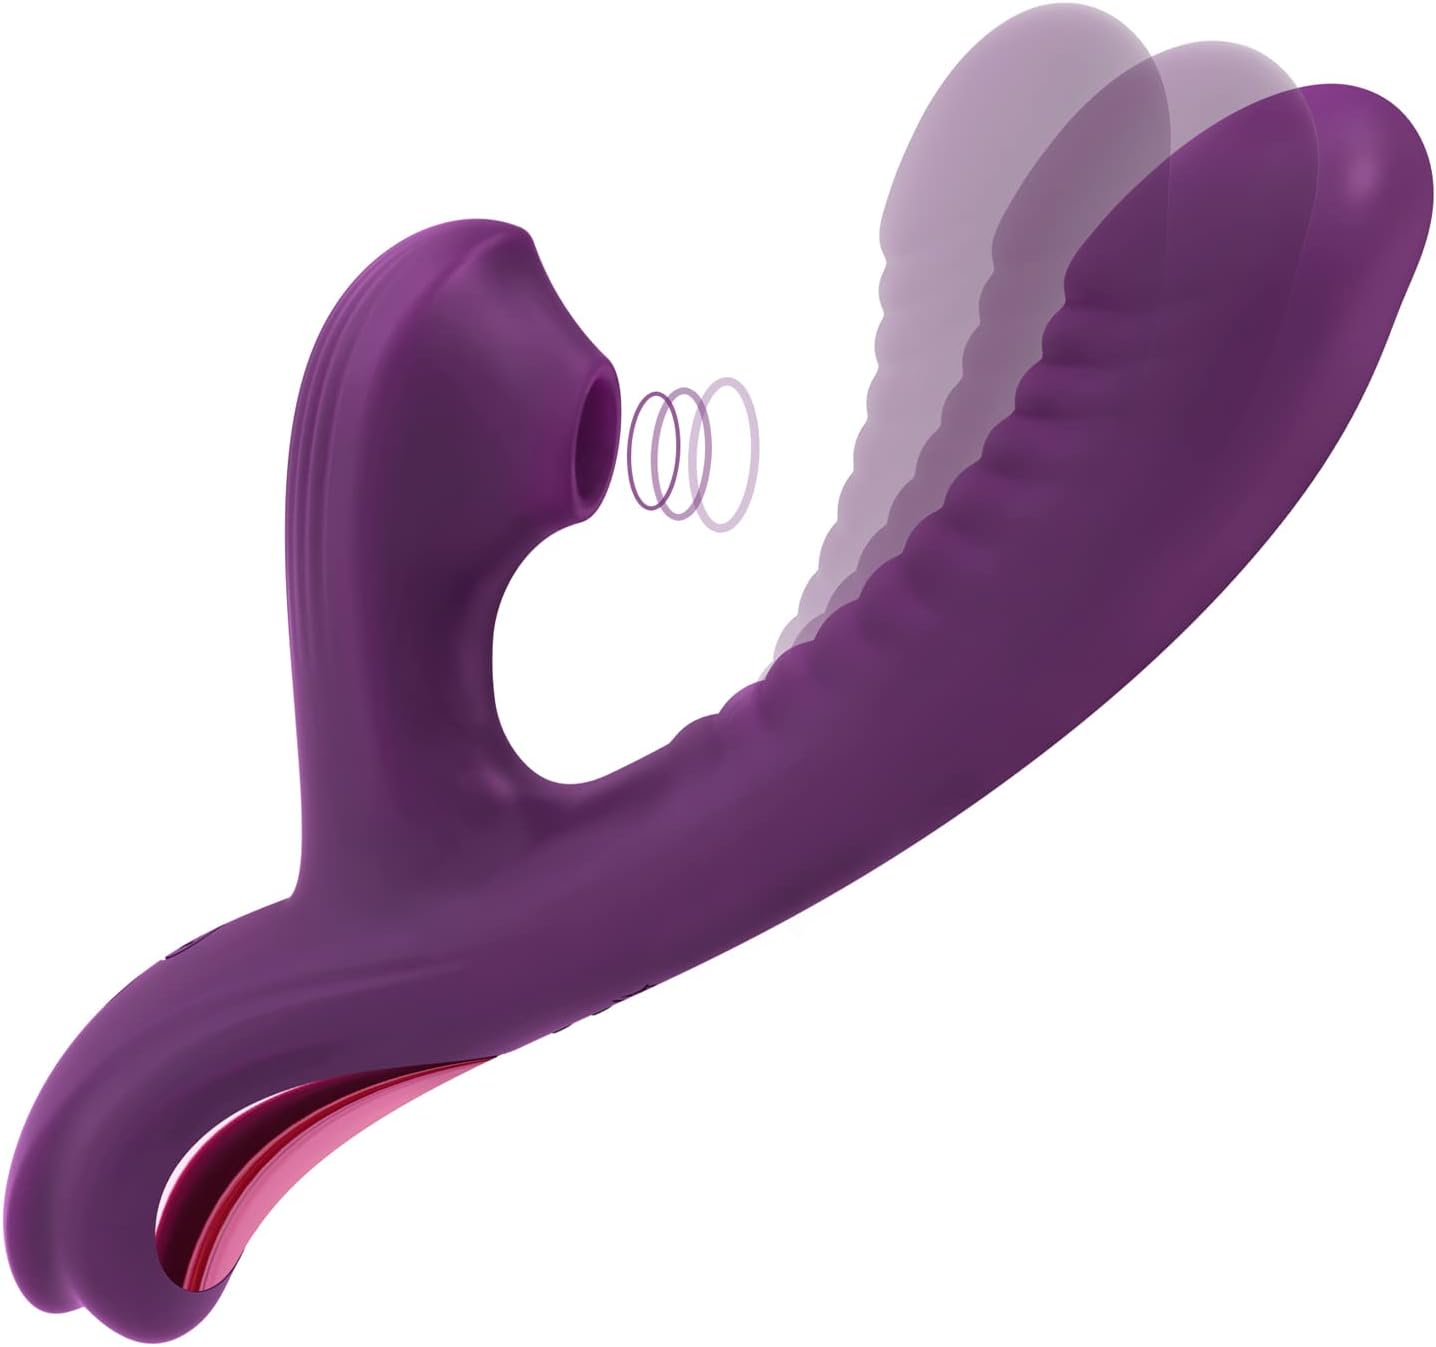 7 Types of Vibrators To Help You Find Your Pleasure in 2023 photo